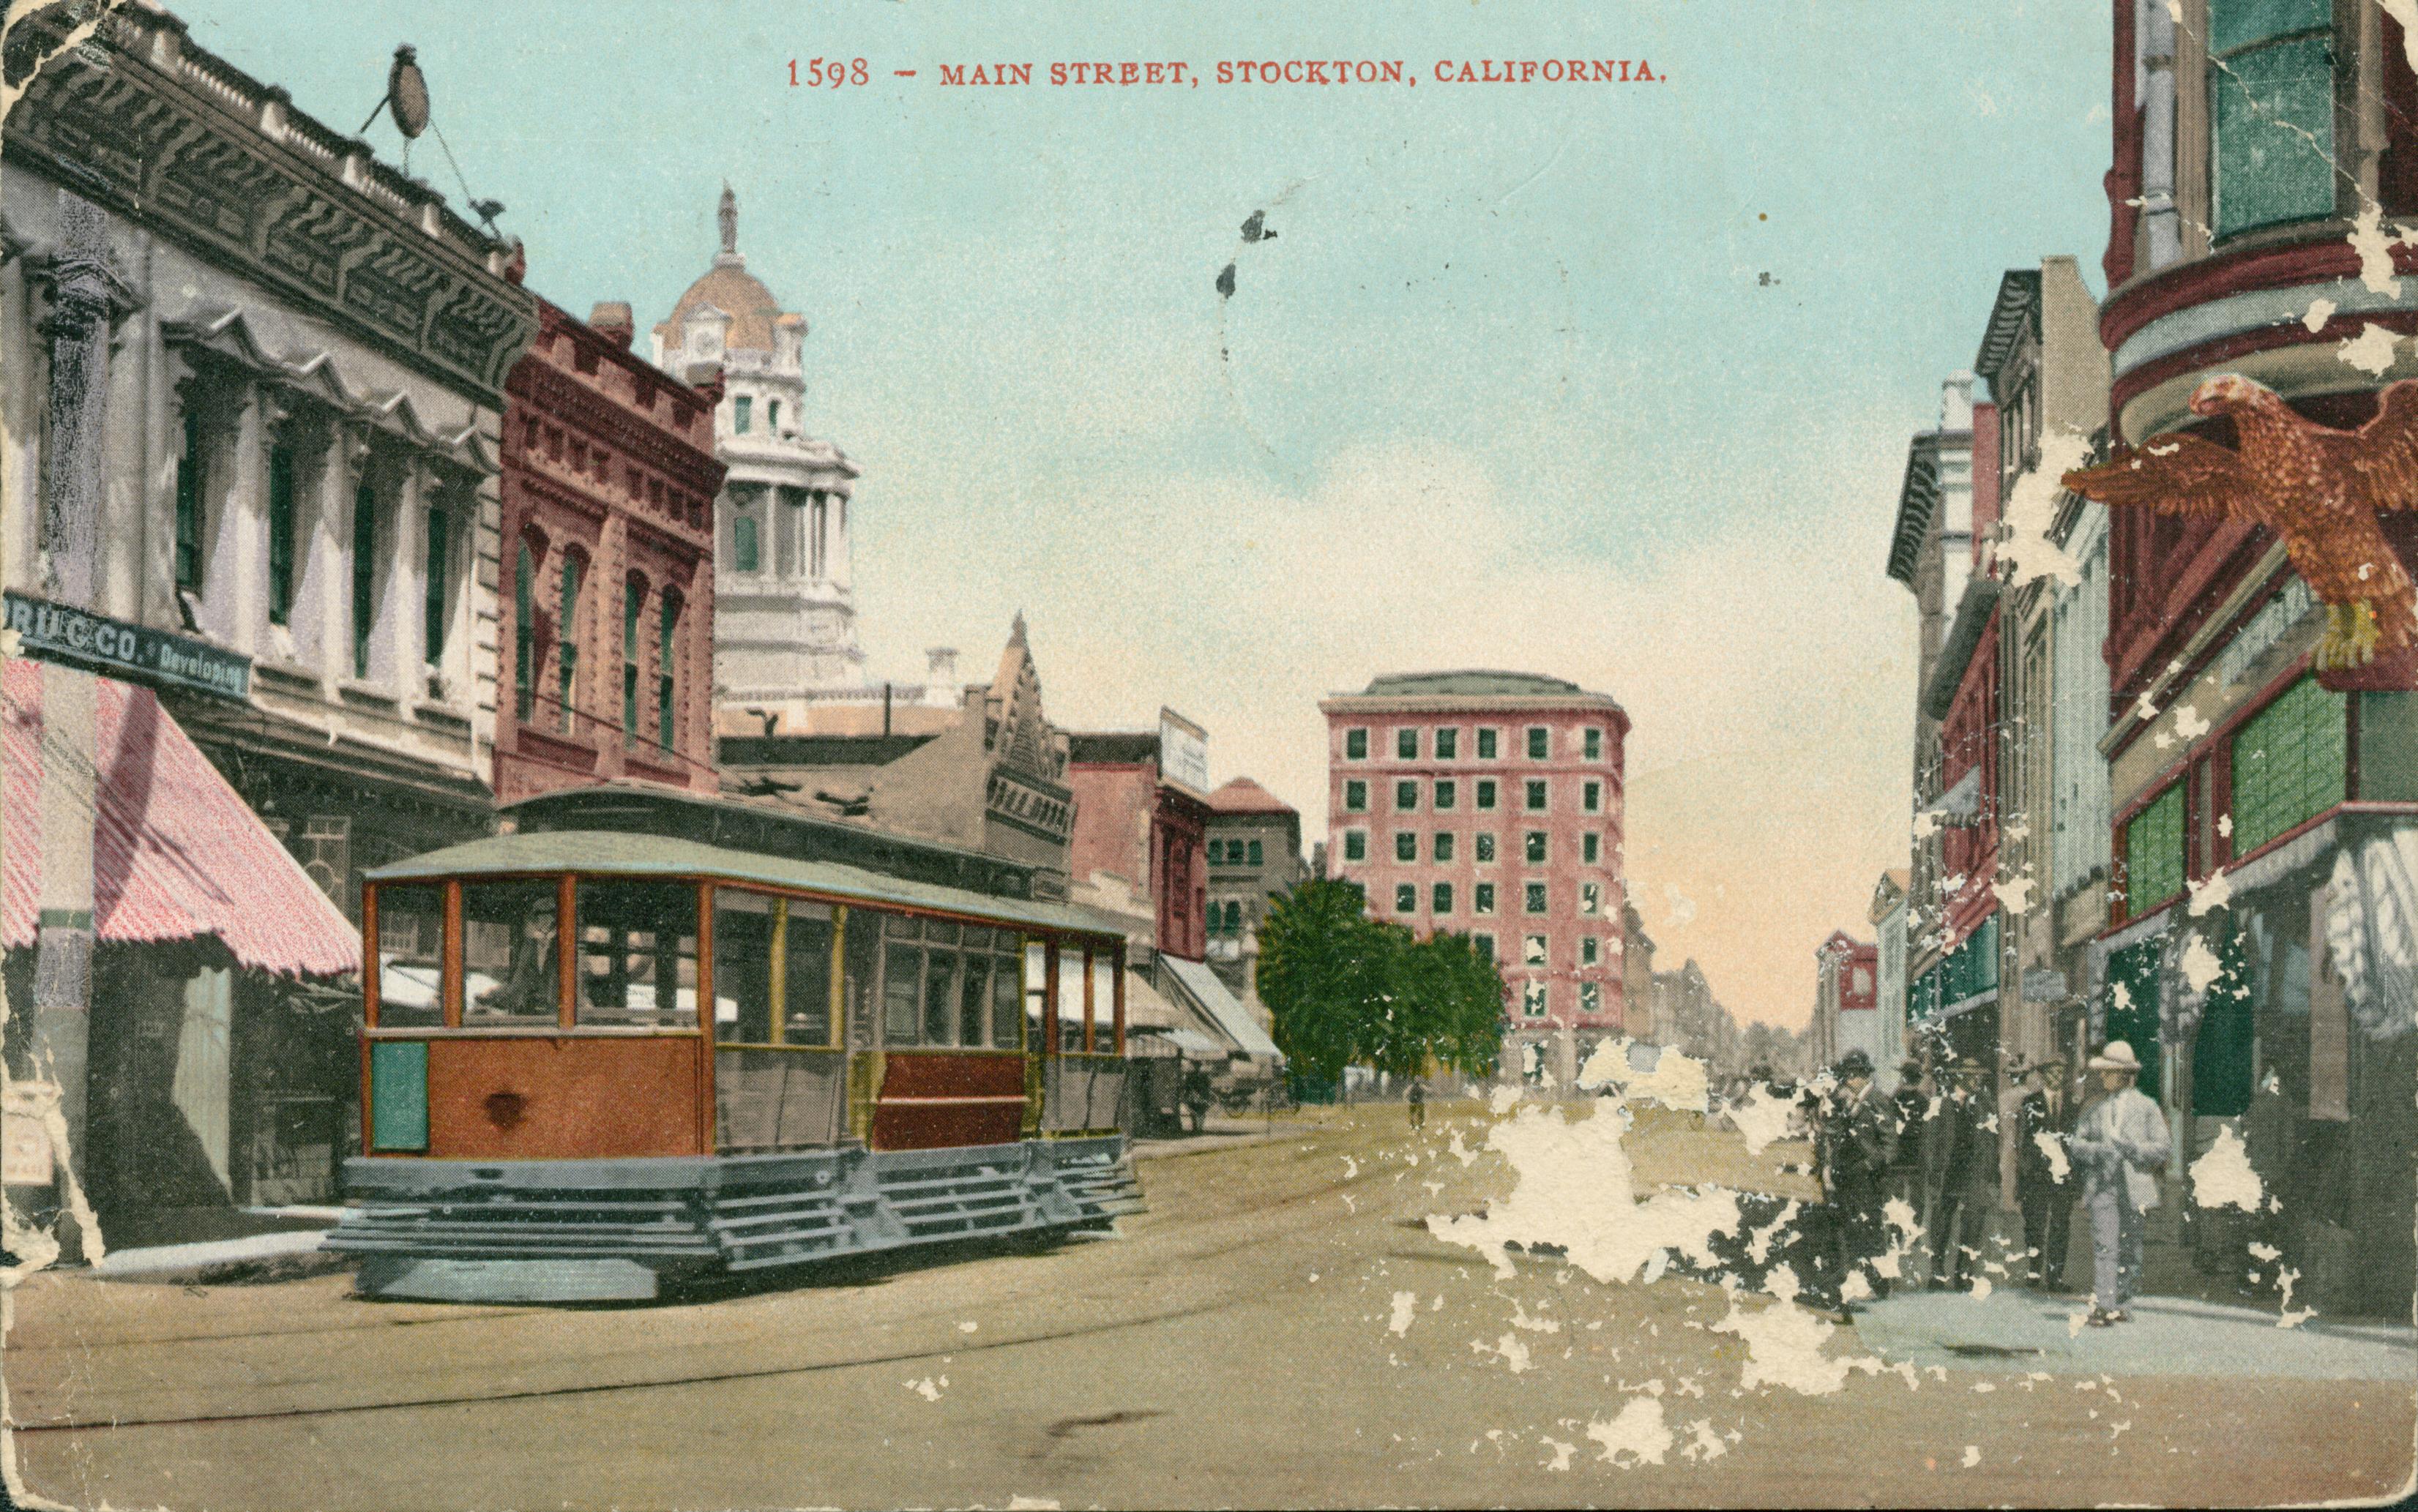 View of Main Street with trolley car and tracks down the center of the street, people waiting on corner